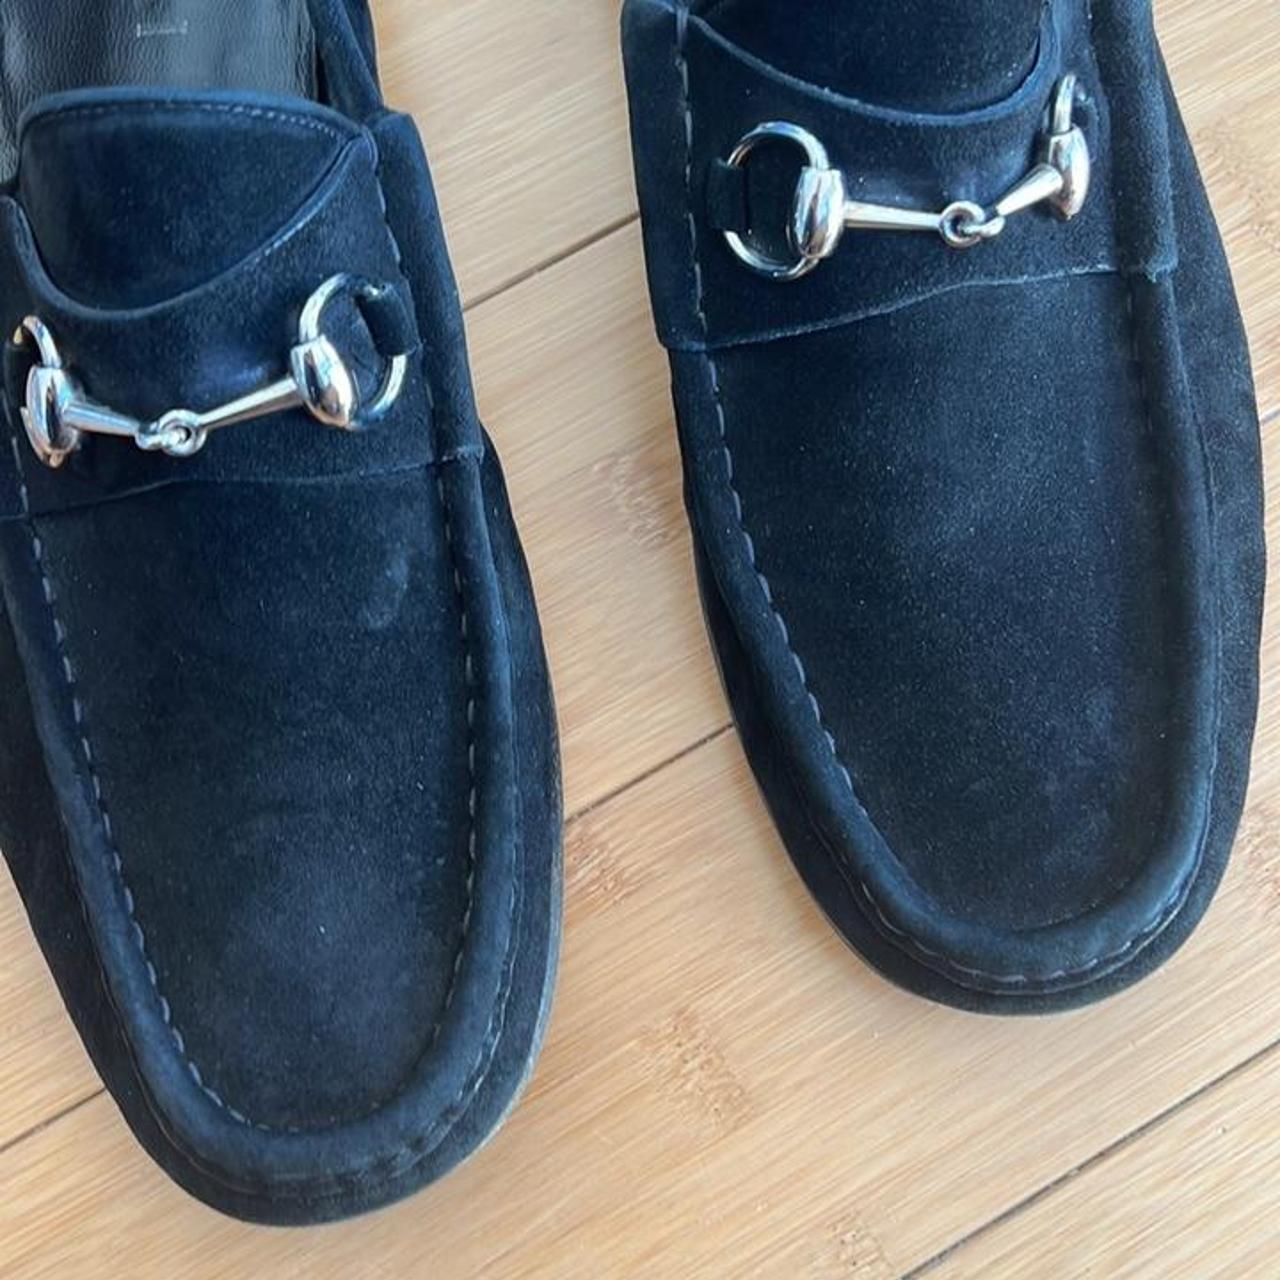 Product Image 4 - Men’s Gucci loafers

Black suede loafers.